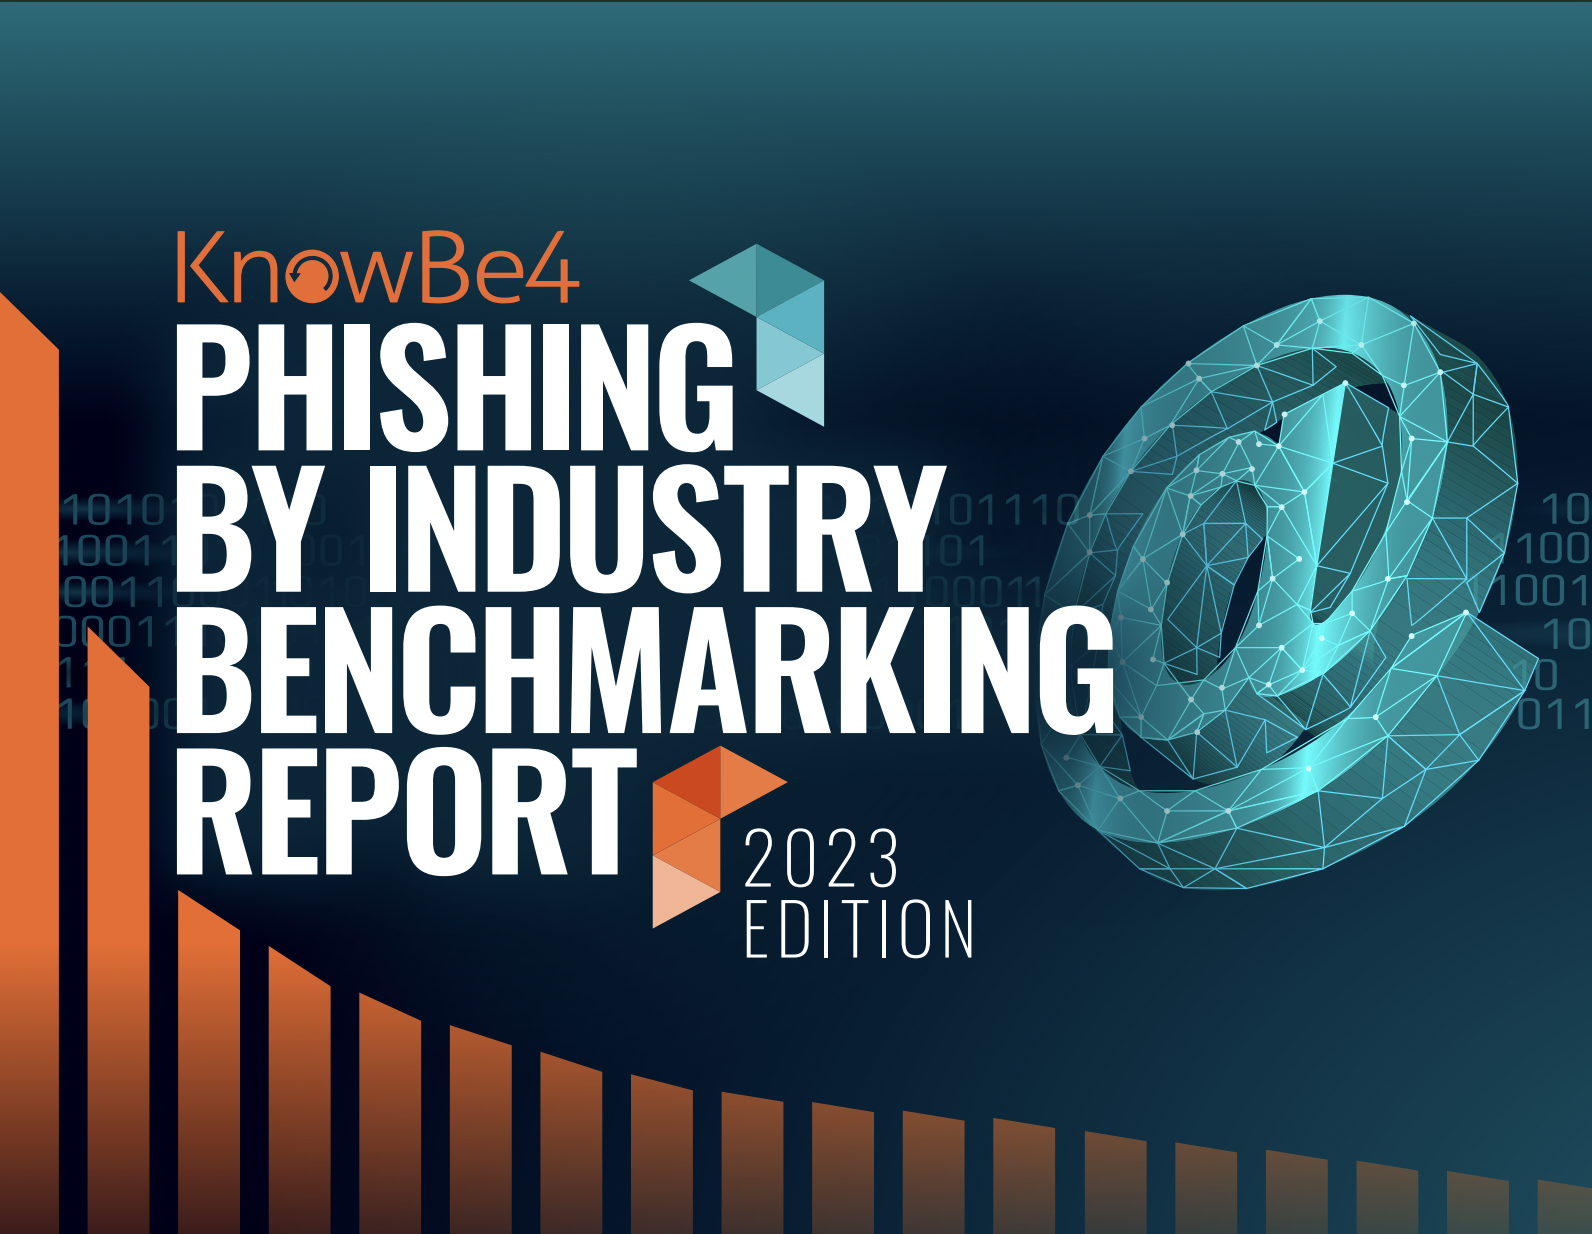 Summary of KnowBe4 Phishing by Industry Benchmarking Report, 2023